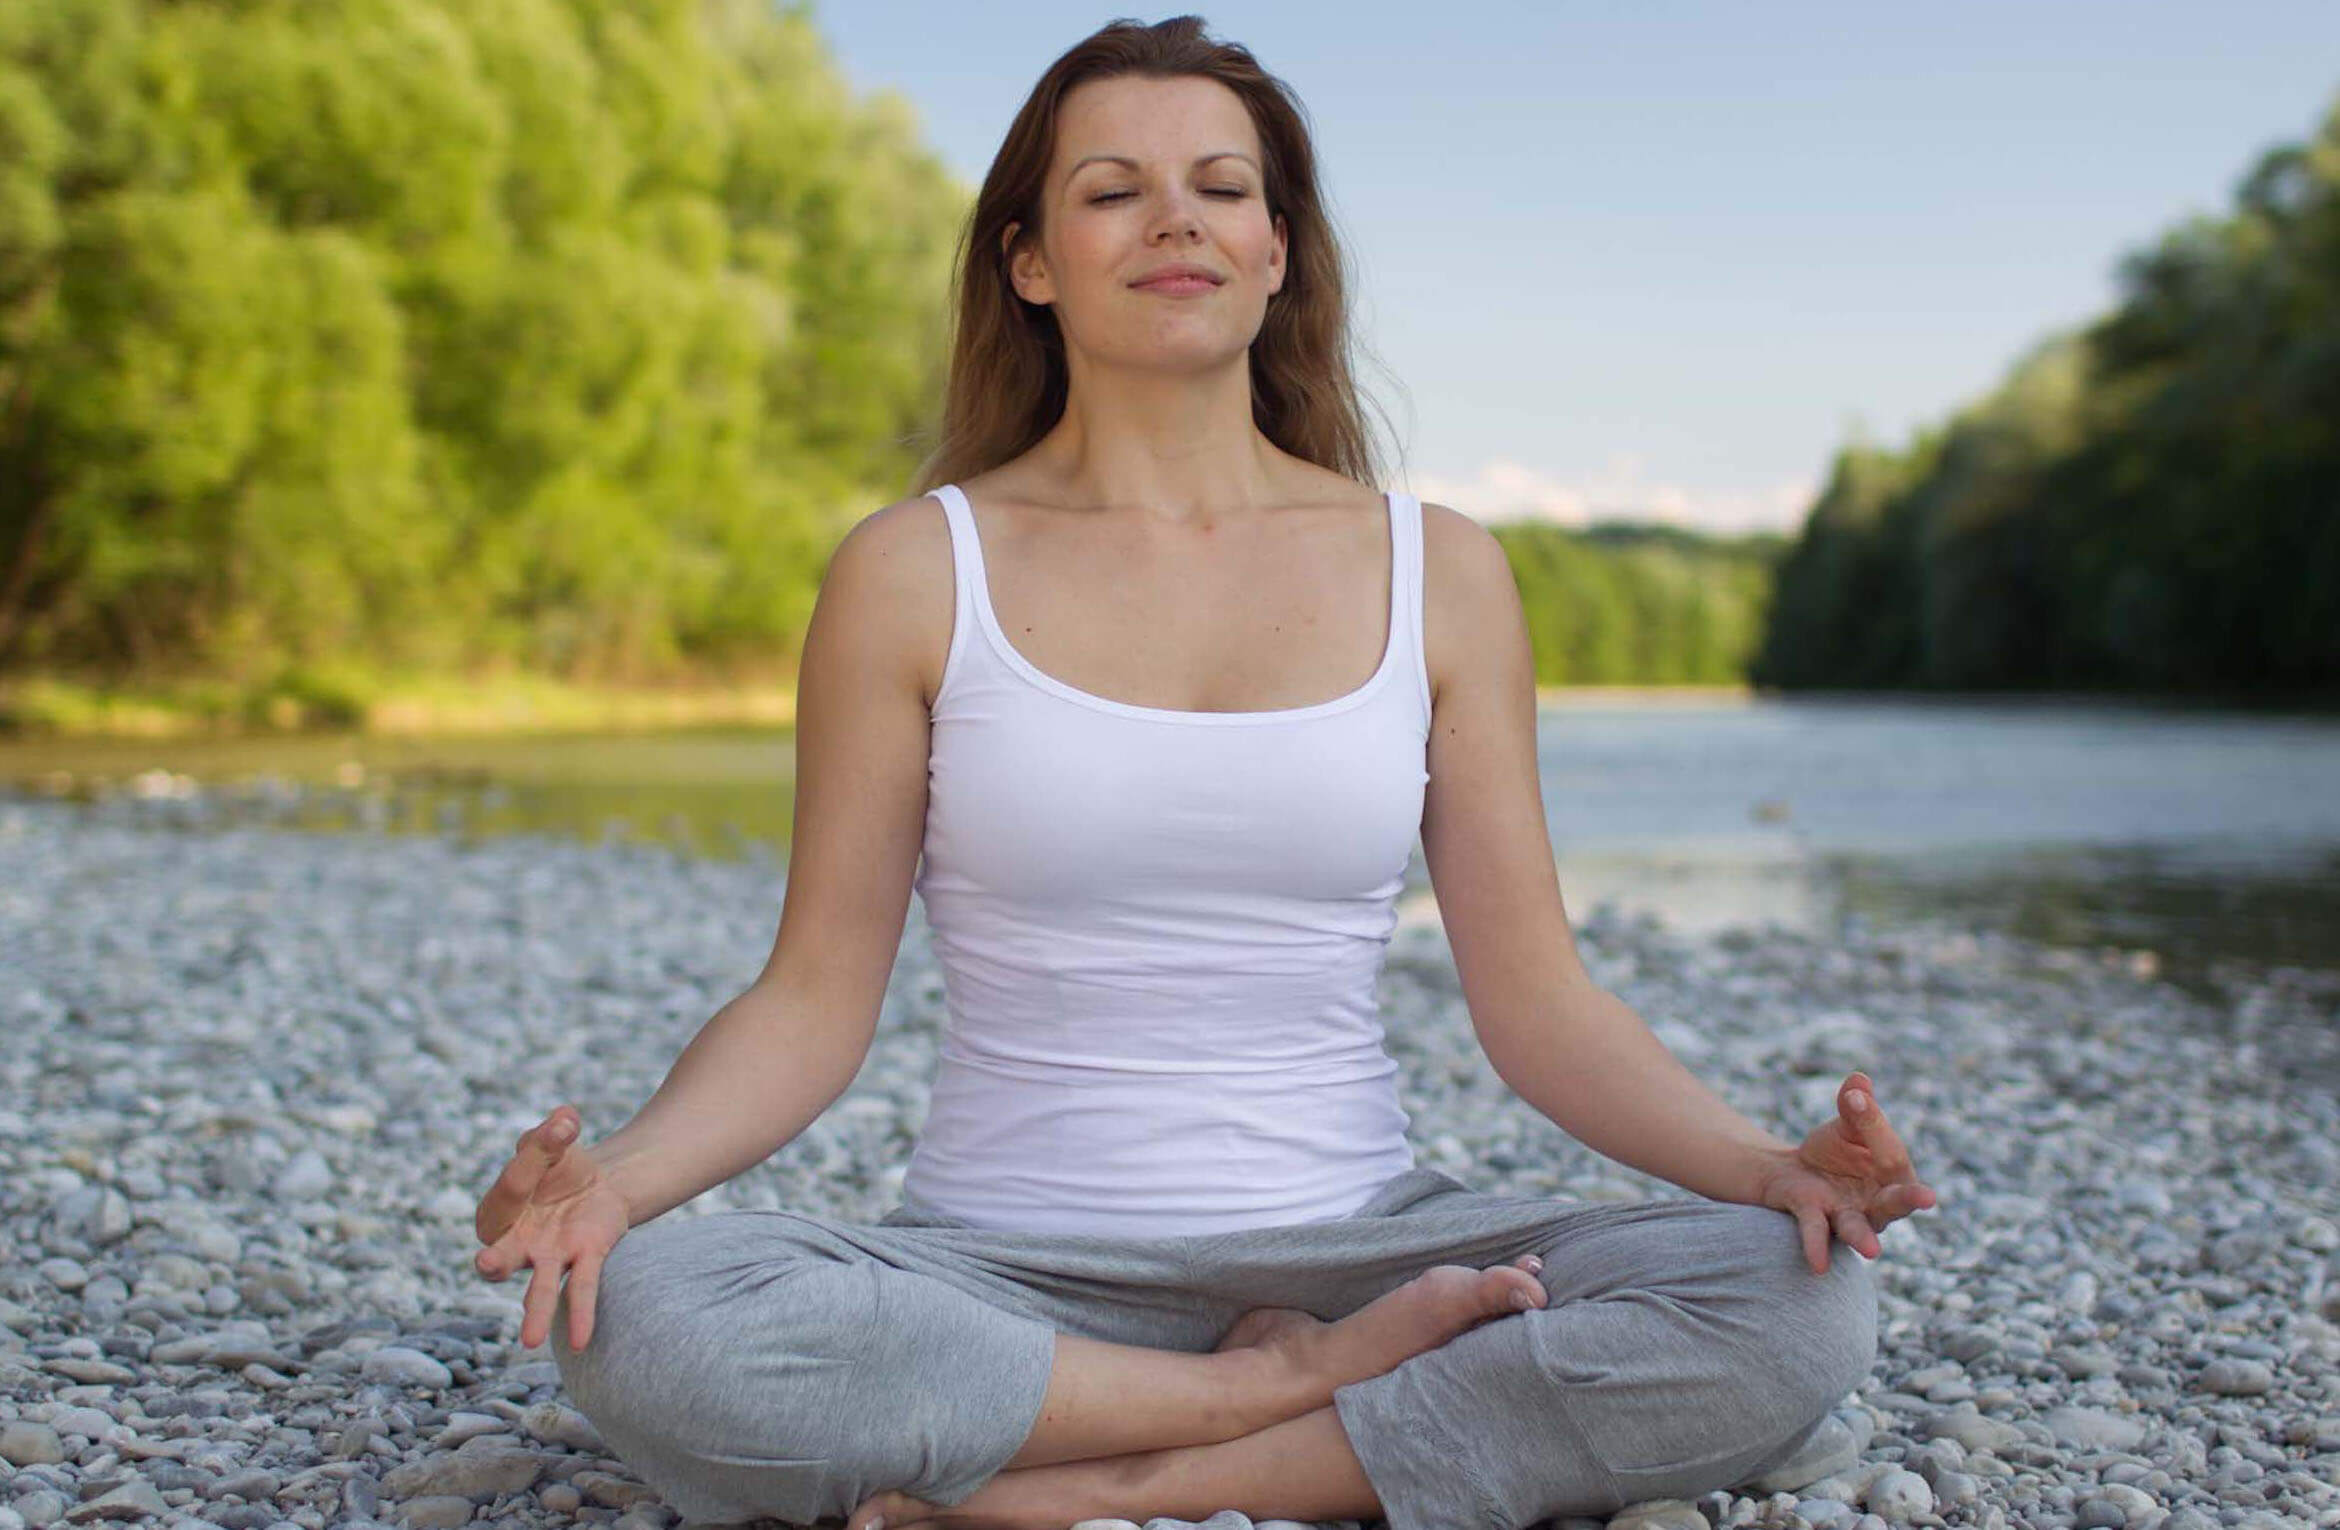 Four Weeks Of Pranayama Breathing Exercises Reduces Anxiety And Negative Affect And Is Linked To